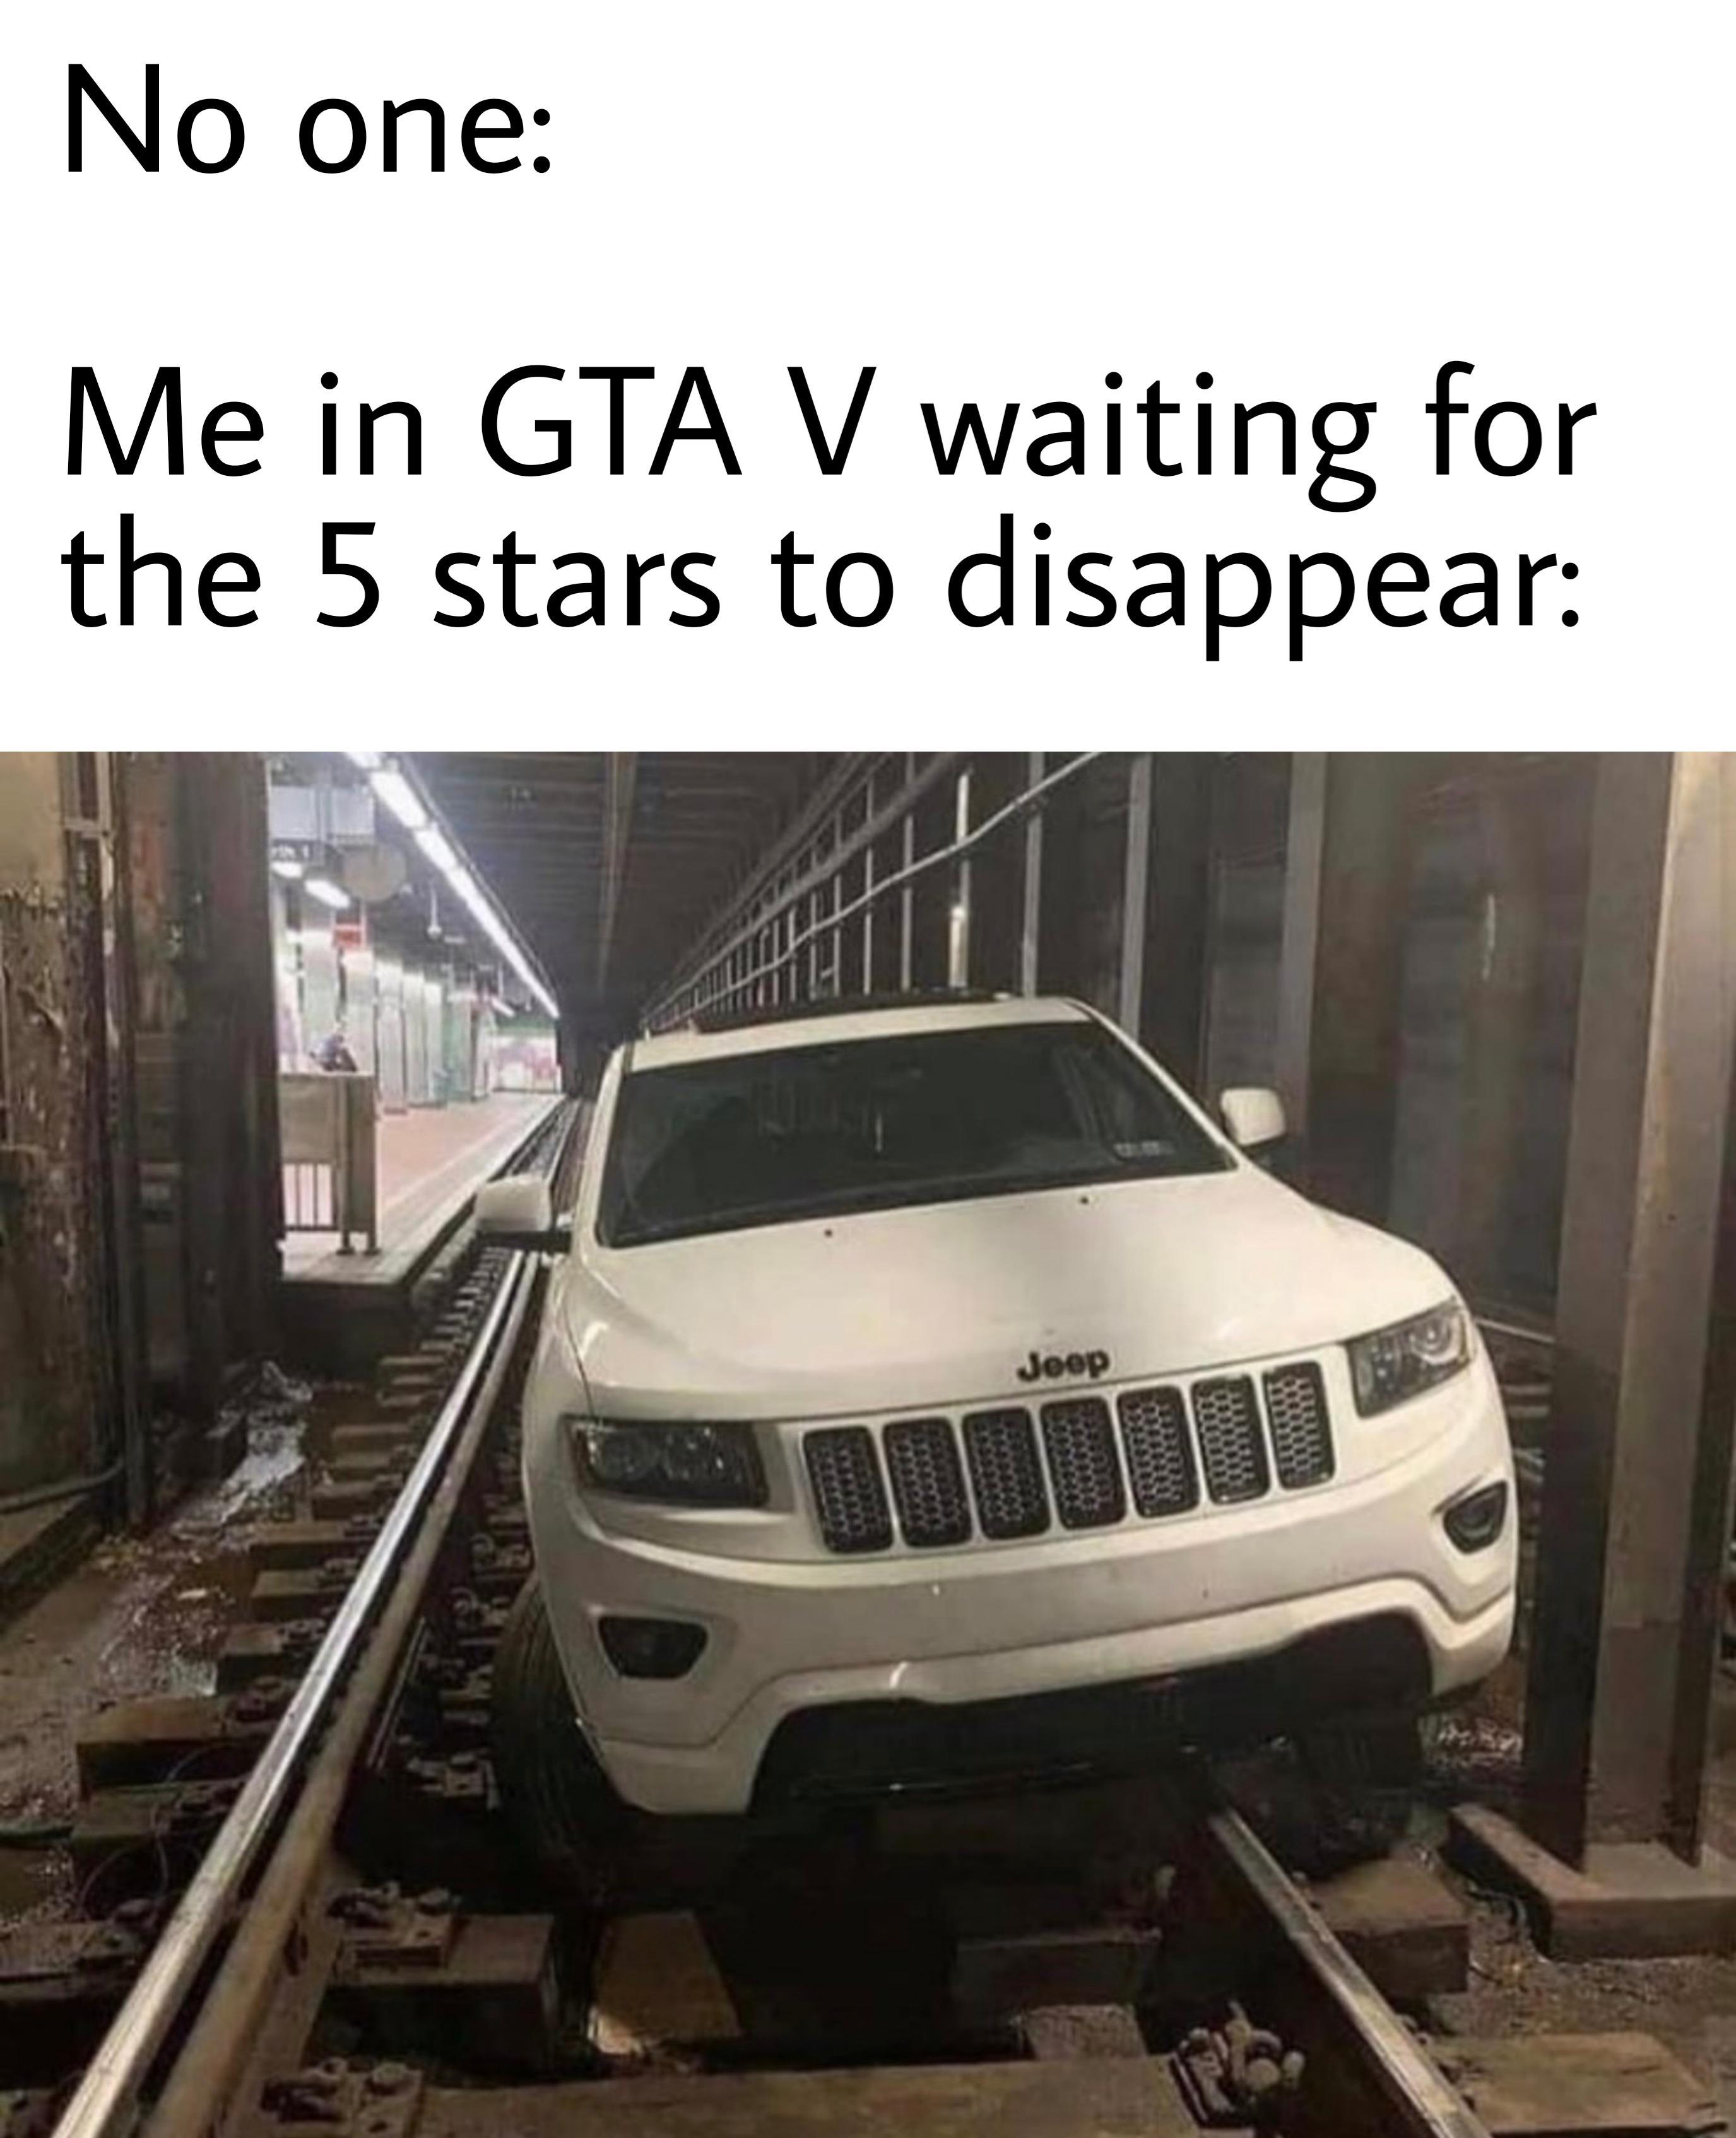 car on septa trolley tunnel - No one Me in Gta V waiting for the 5 stars to disappear Jeep